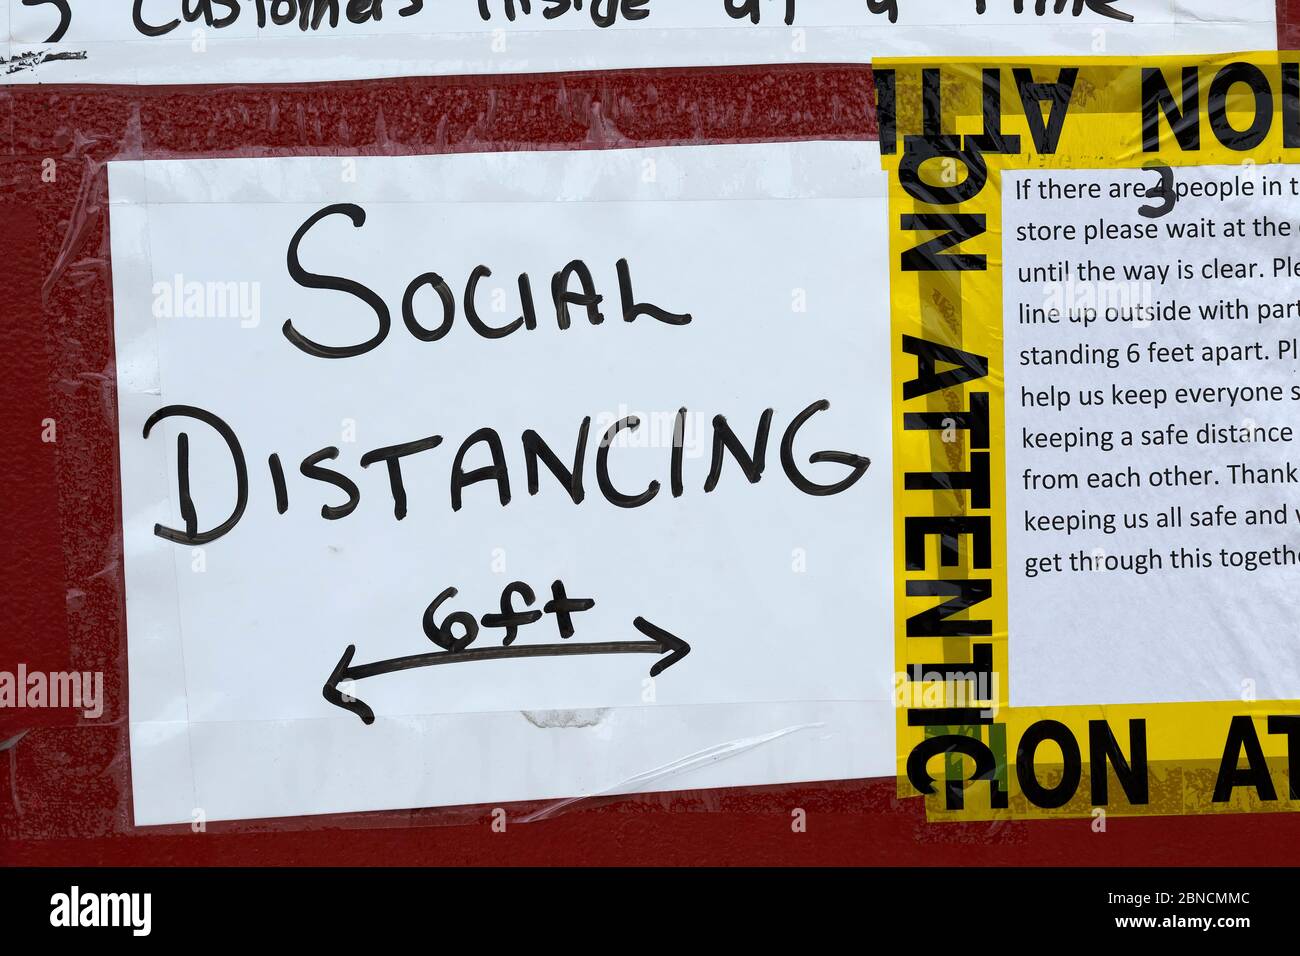 Hand made social distancing sign in business entrance due to COVID-19. Stock Photo